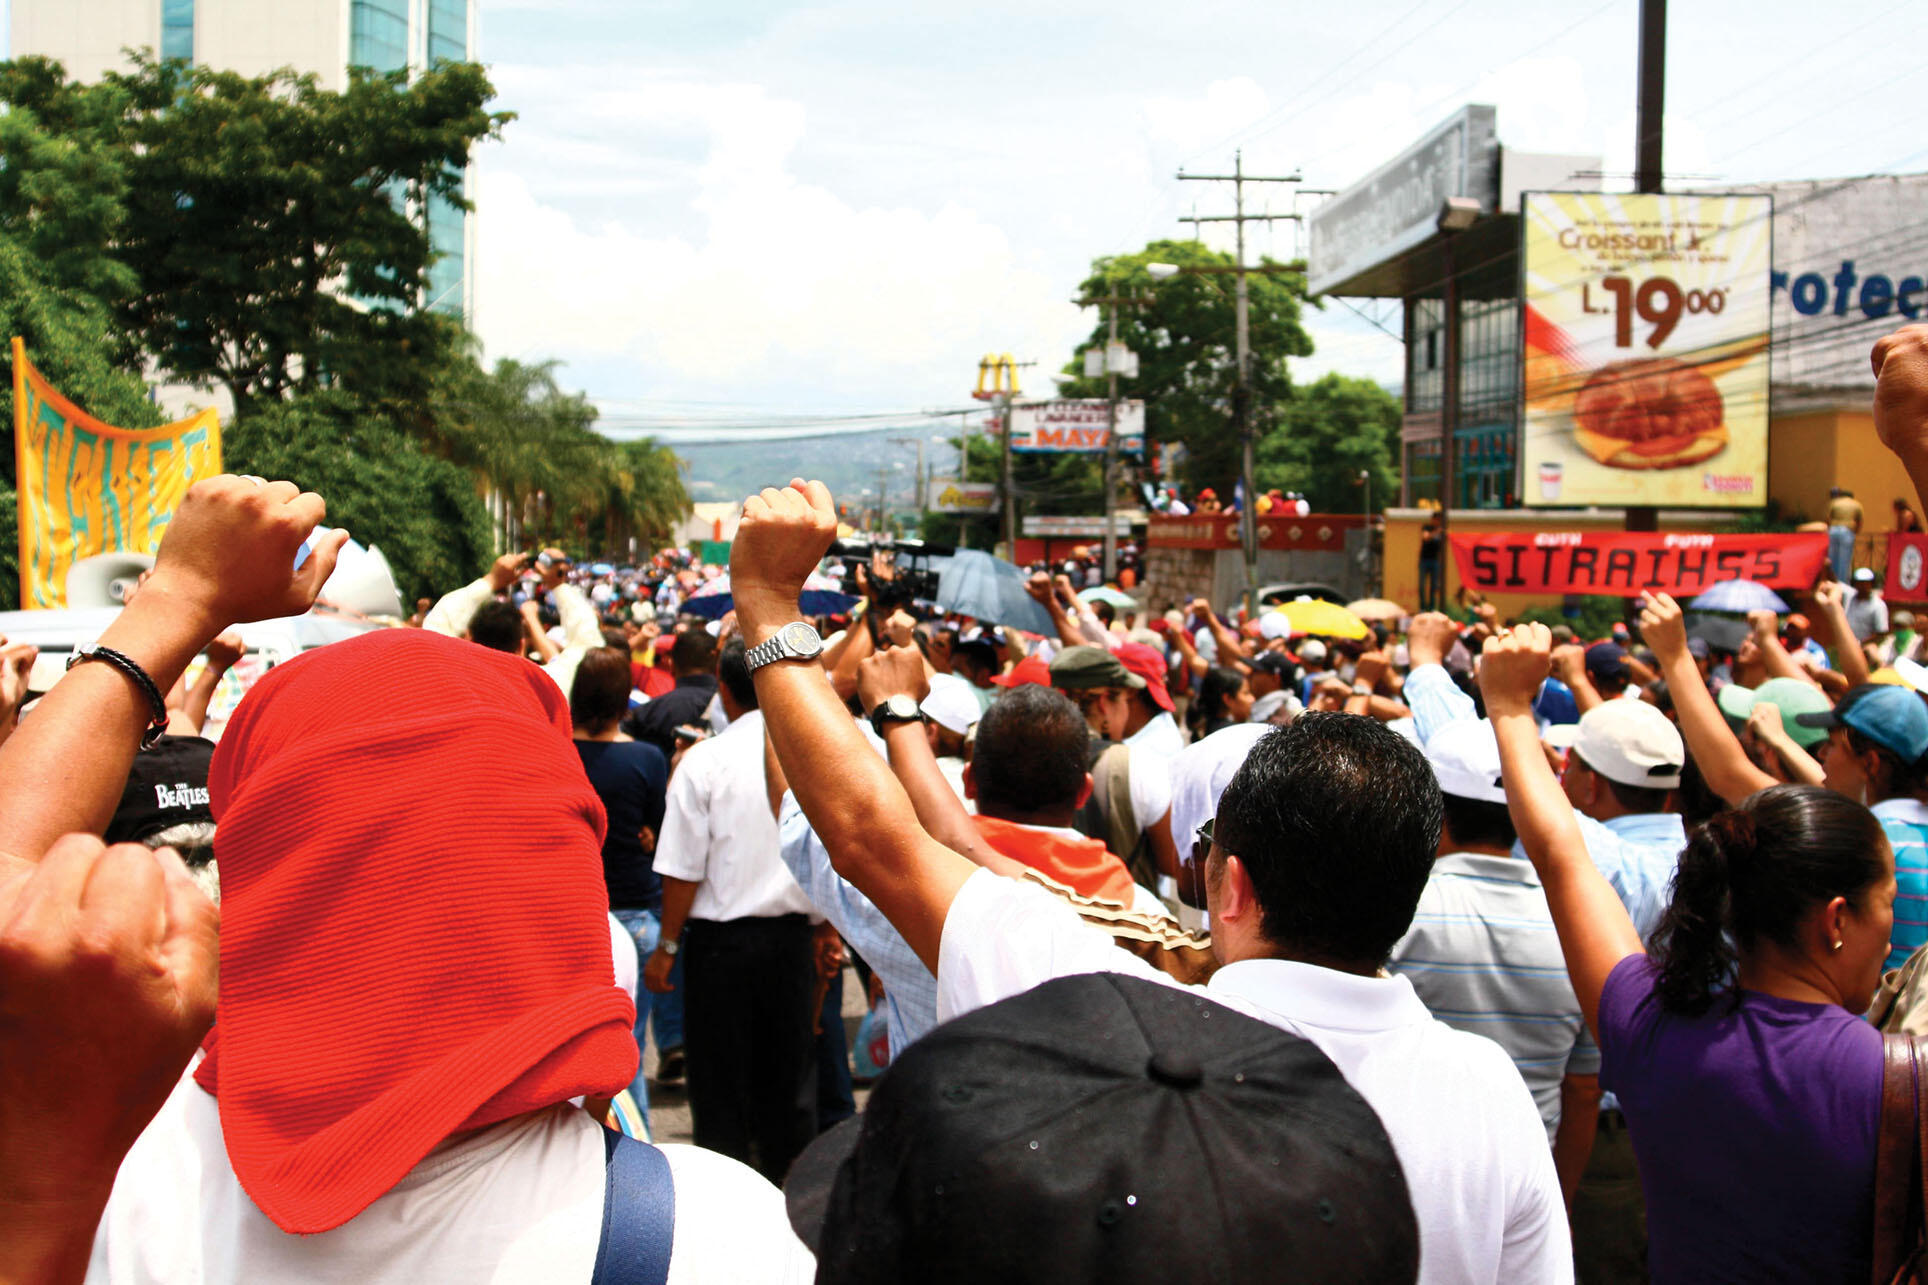 A crowd of people protests following the 2009 coup in Honduras. (Photo by Yamil Gonzales.)